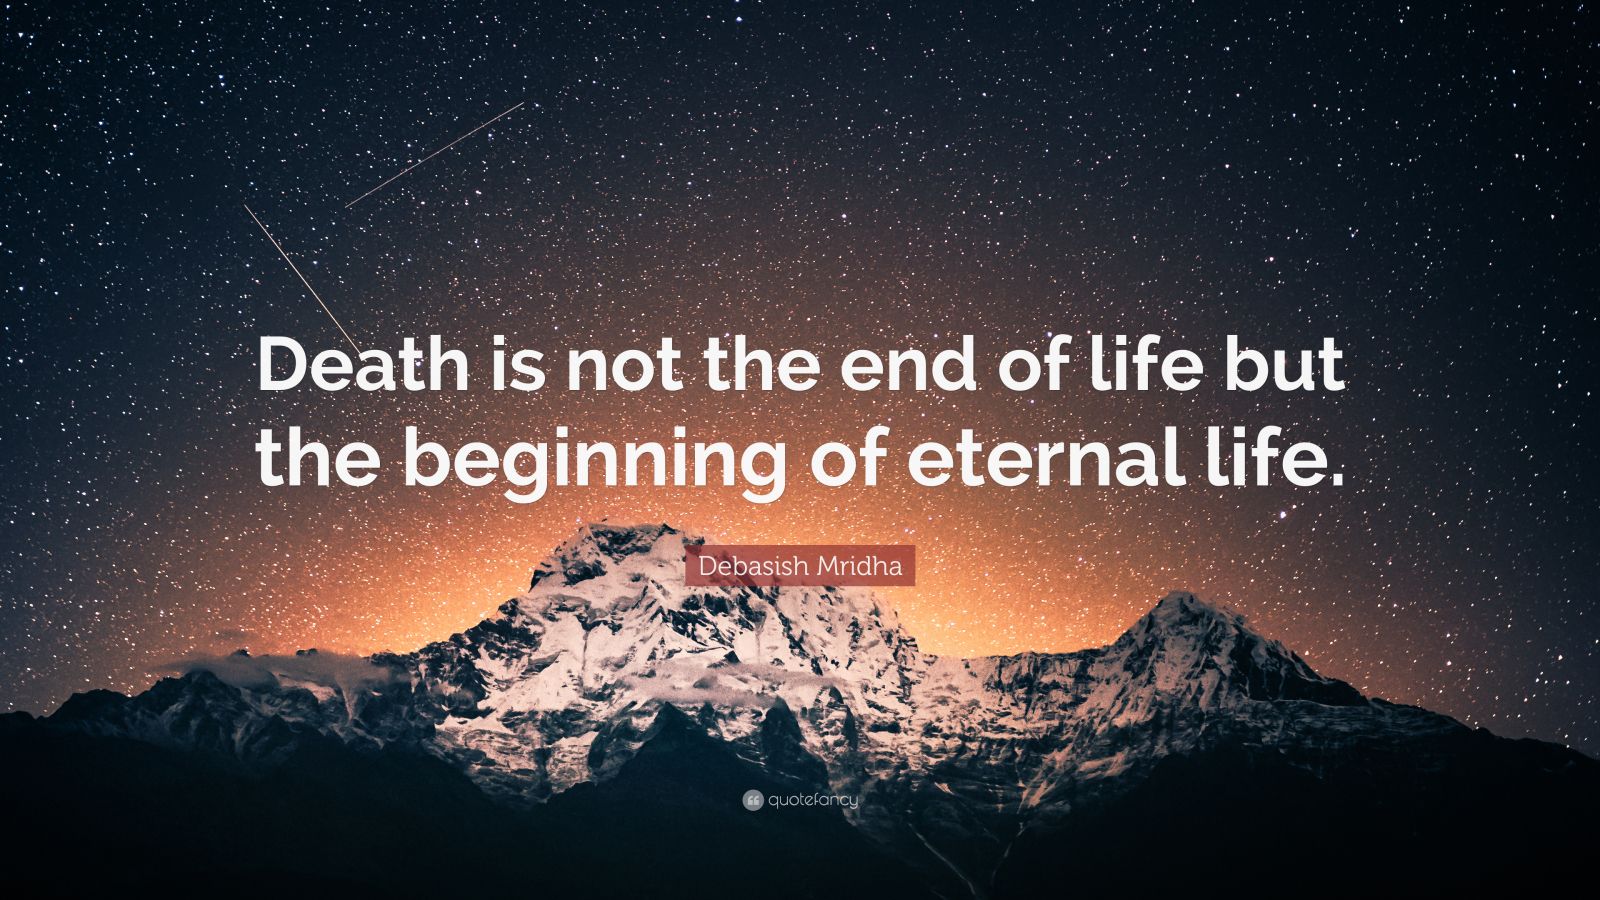 Debasish Mridha Quote: “Death is not the end of life but the beginning ...